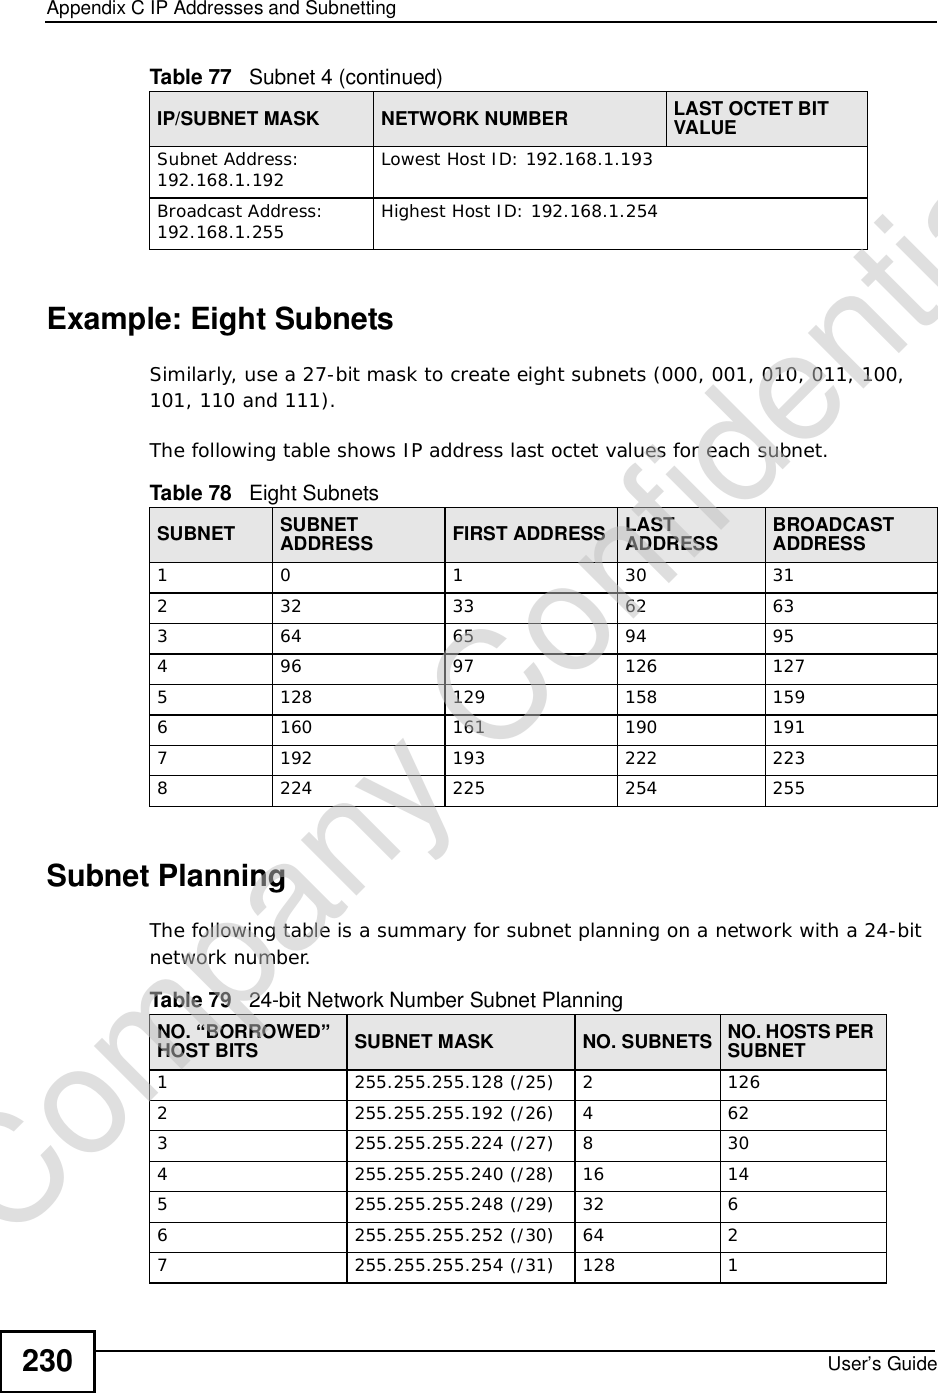 Appendix CIP Addresses and SubnettingUser’s Guide230Example: Eight SubnetsSimilarly, use a 27-bit mask to create eight subnets (000, 001, 010, 011, 100, 101, 110 and 111). The following table shows IP address last octet values for each subnet.Subnet PlanningThe following table is a summary for subnet planning on a network with a 24-bit network number.Subnet Address: 192.168.1.192 Lowest Host ID: 192.168.1.193Broadcast Address: 192.168.1.255 Highest Host ID: 192.168.1.254Table 77   Subnet 4 (continued)IP/SUBNET MASK NETWORK NUMBER LAST OCTET BIT VALUETable 78   Eight SubnetsSUBNET SUBNET ADDRESS FIRST ADDRESS LAST ADDRESS BROADCAST ADDRESS10130 312 32 33 62 633 64 65 94 954 96 97 126 1275 128 129 158 1596 160 161 190 1917 192 193 222 2238 224 225 254 255Table 79   24-bit Network Number Subnet PlanningNO. “BORROWED” HOST BITS SUBNET MASK NO. SUBNETS NO. HOSTS PER SUBNET1255.255.255.128 (/25) 2 1262 255.255.255.192 (/26) 4 623 255.255.255.224 (/27) 8 304 255.255.255.240 (/28) 16 145 255.255.255.248 (/29) 32 66 255.255.255.252 (/30) 64 27 255.255.255.254 (/31) 128 1Company Confidential